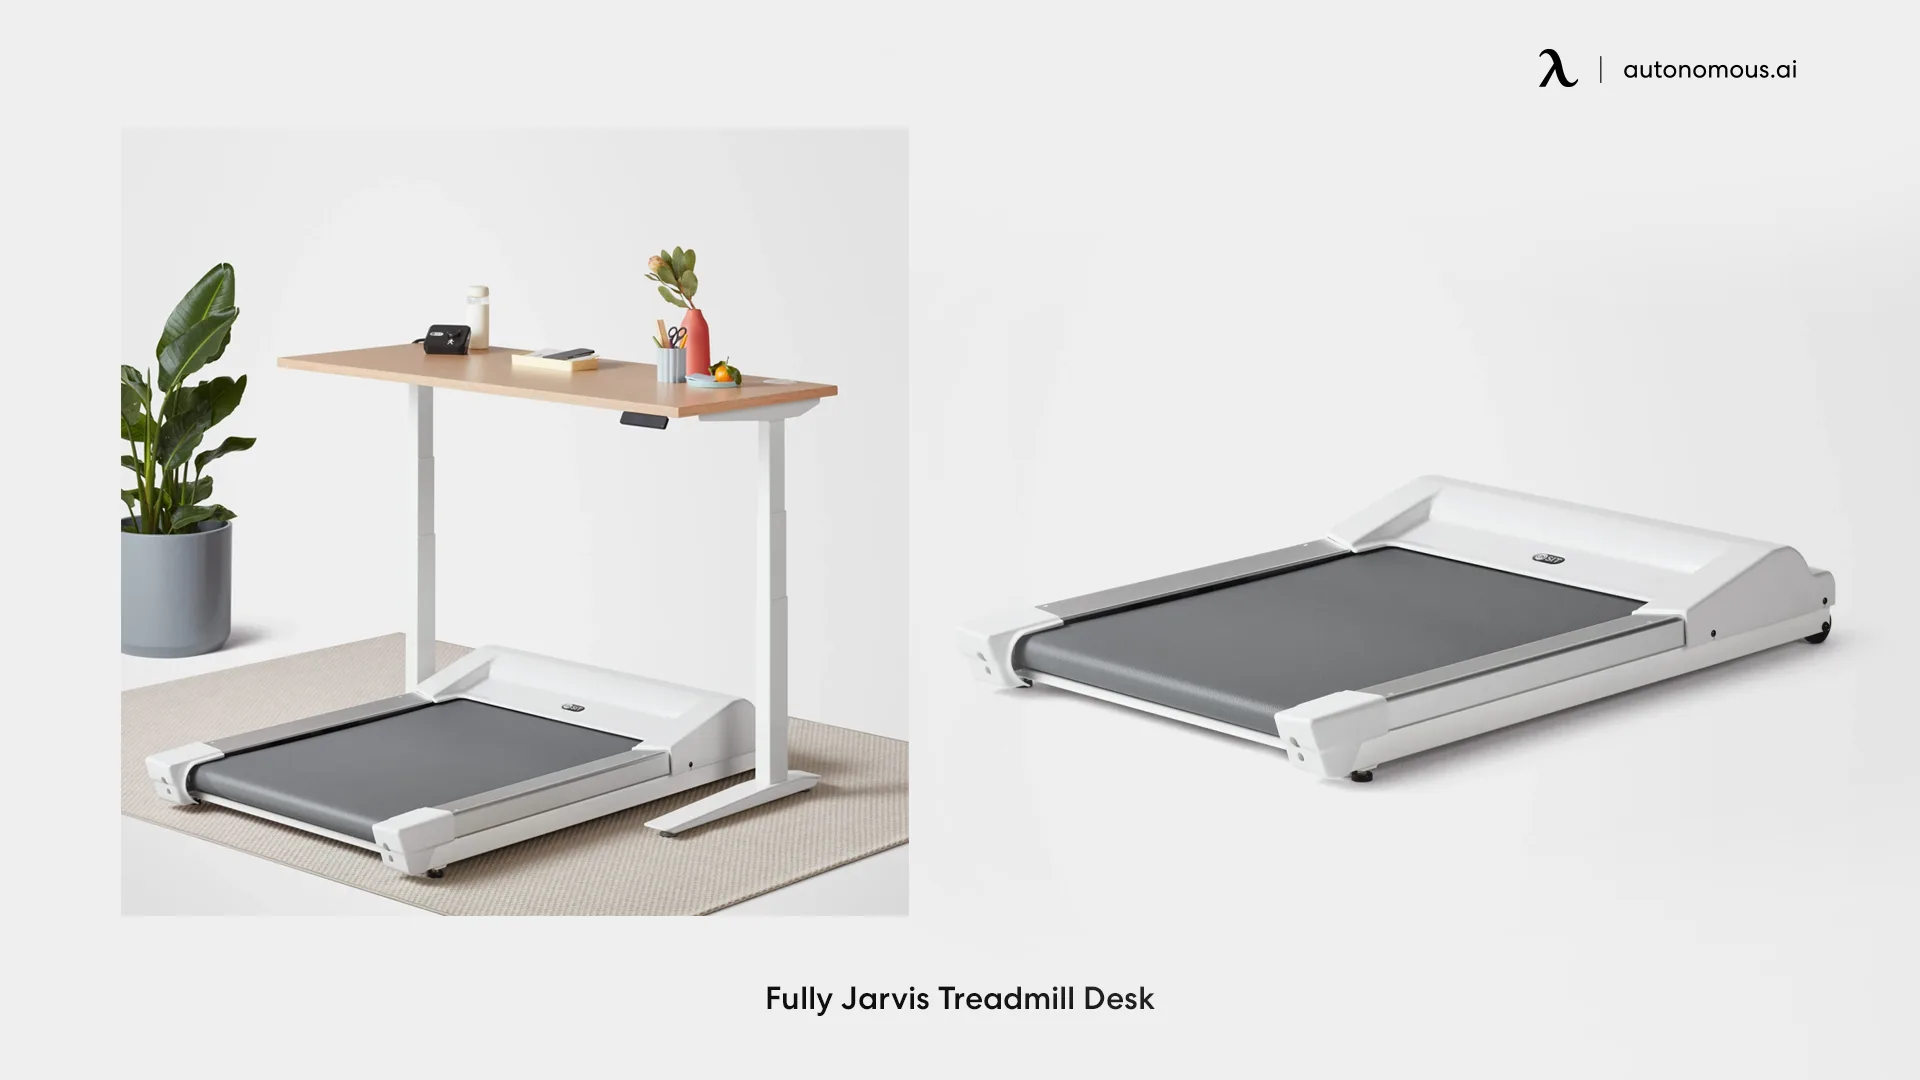 Fully Jarvis standing desk with treadmill